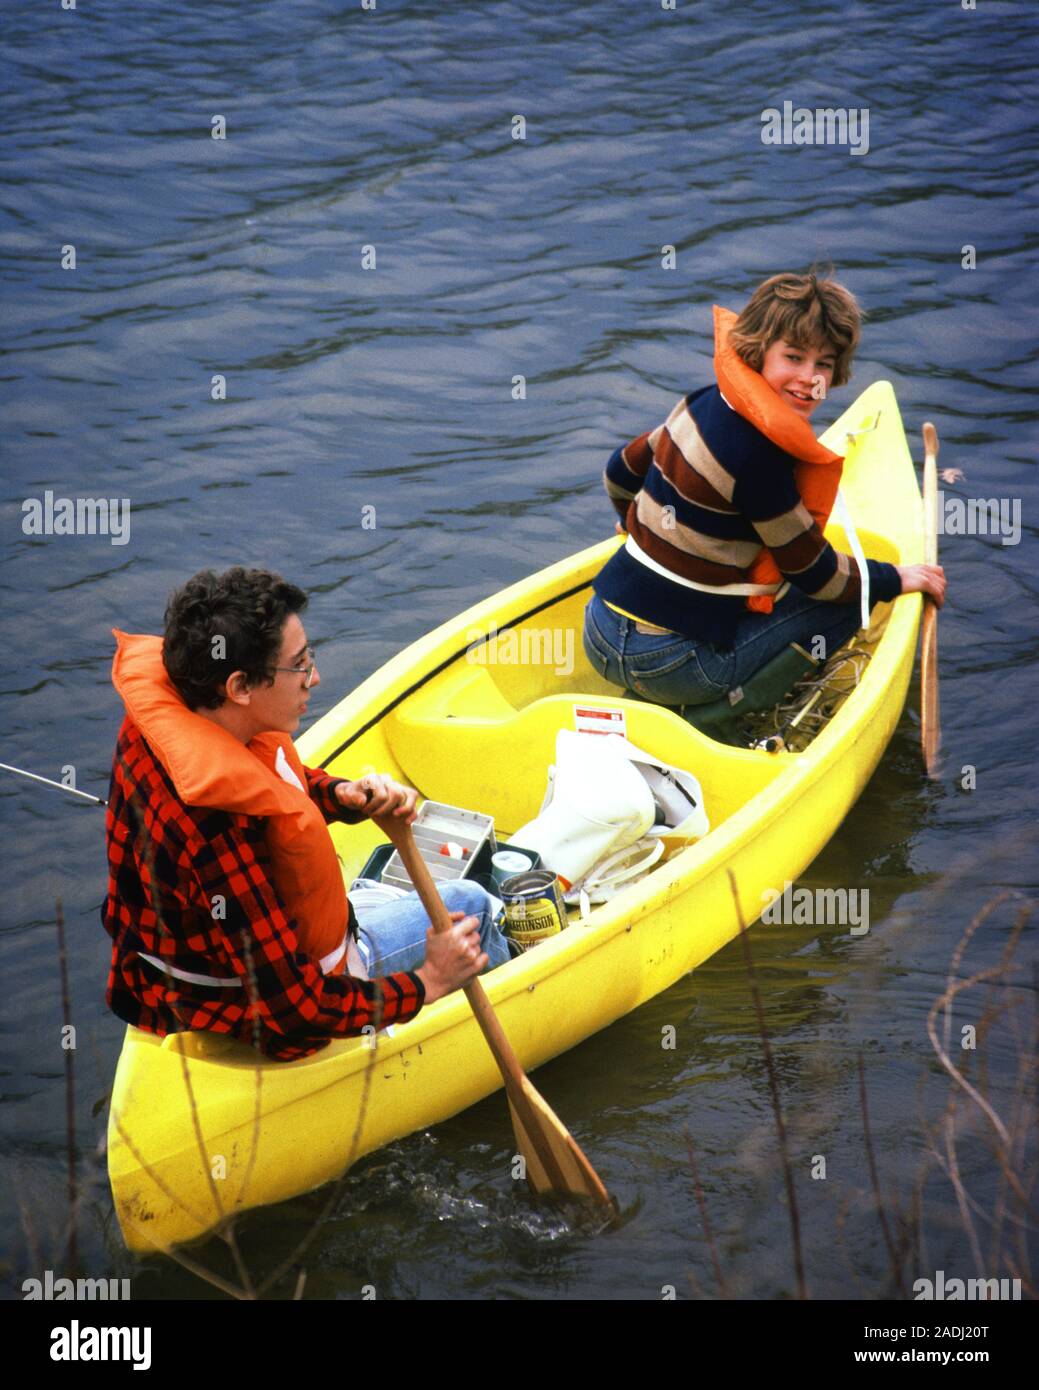 1980s PRETEEN BOY AND GIRL WEARING SAFETY ORANGE LIFE JACKETS HE PADDLING YELLOW PLASTIC CANOE IN WATER SHE LOOKING AT CAMERA - kc9237 PHT001 HARS RIVER NOSTALGIA BROTHER OLD FASHION SISTER 1 JUVENILE VEHICLE BALANCE SAFETY TEAMWORK VACATION CANOE ATHLETE PLEASED JOY LIFESTYLE FEMALES BROTHERS RURAL HOME LIFE TRANSPORT COPY SPACE FRIENDSHIP HALF-LENGTH PERSONS STREAM MALES RISK ATHLETIC SIBLINGS CONFIDENCE ORANGE SISTERS TRANSPORTATION EYE CONTACT DATING TIME OFF CANOEING HAPPINESS CHEERFUL HIGH ANGLE ADVENTURE PROTECTION AND GETAWAY EXCITEMENT RECREATION SHE IN HOLIDAYS OARS PRETEEN SIBLING Stock Photo